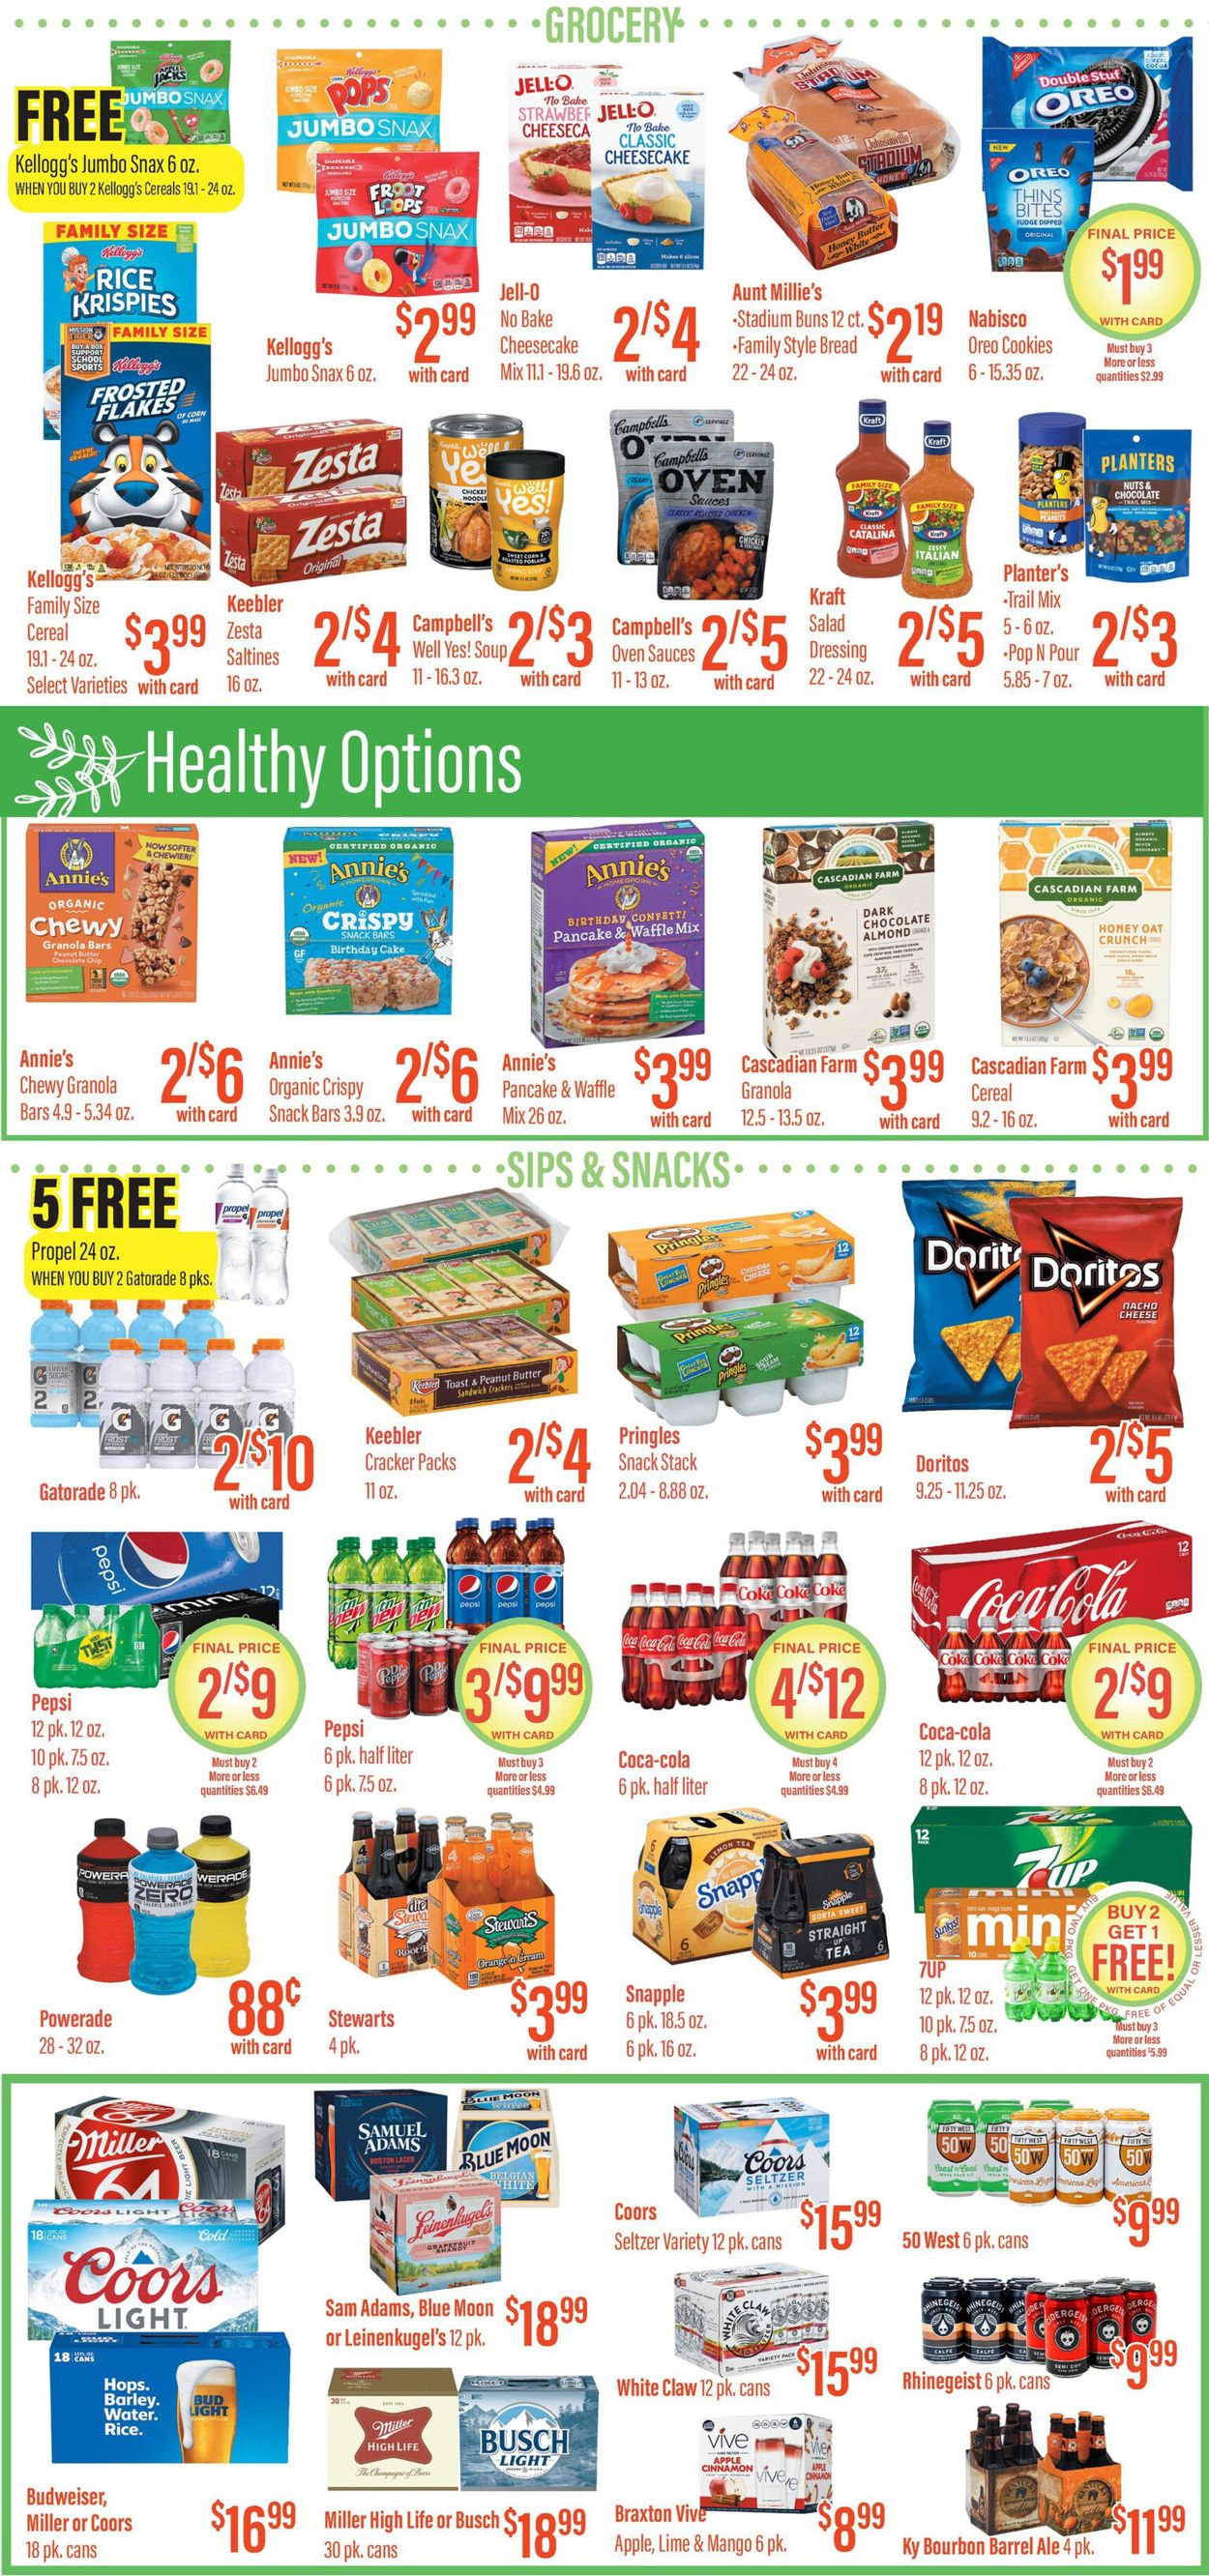 Remke Markets Ad from 04/15/2021